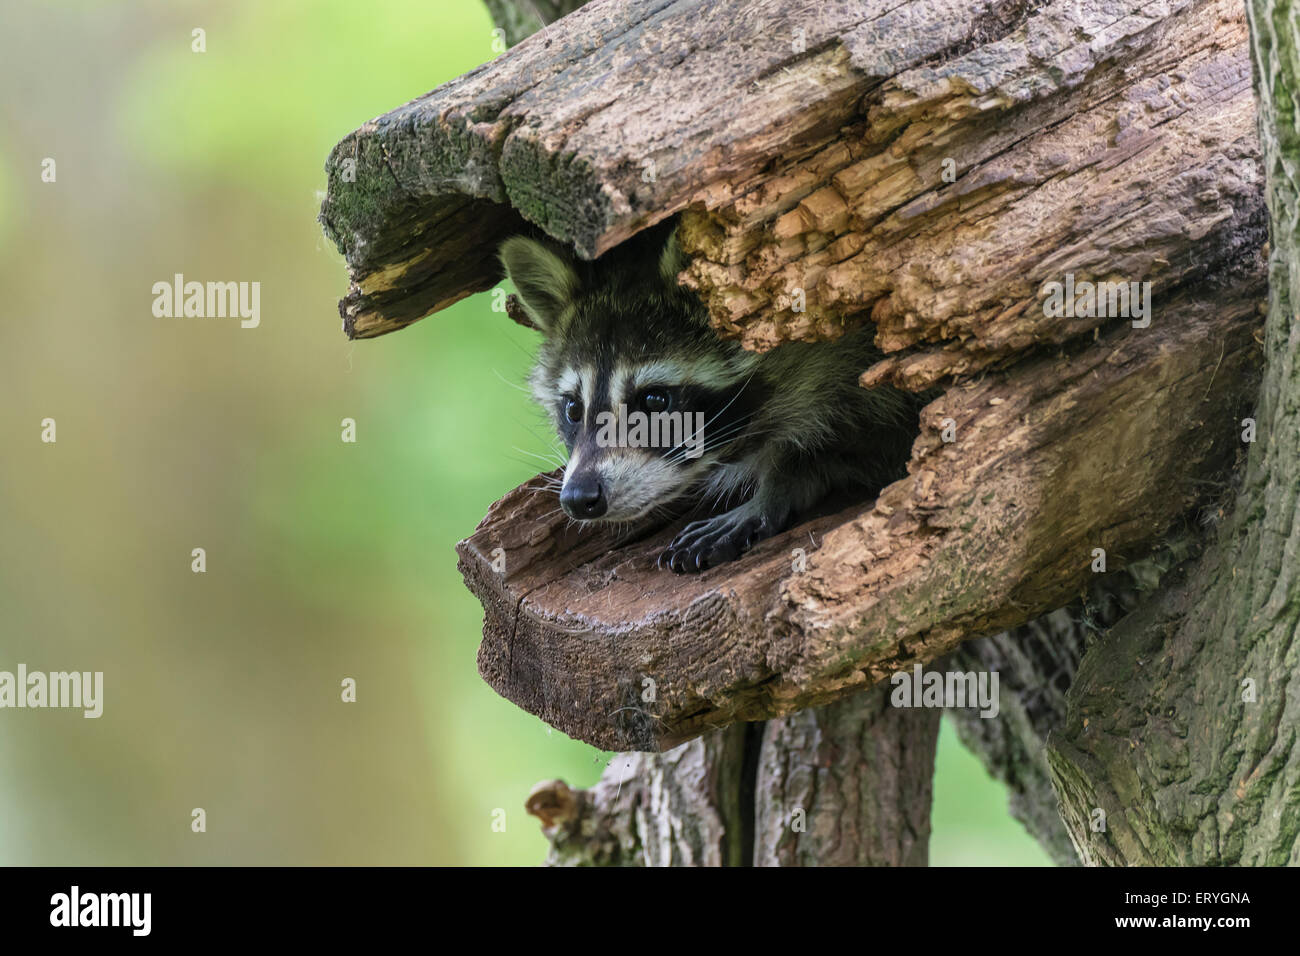 Raccoon (Procyon lotor) sitting in hollow tree trunk, captive, Saarland, Germany Stock Photo